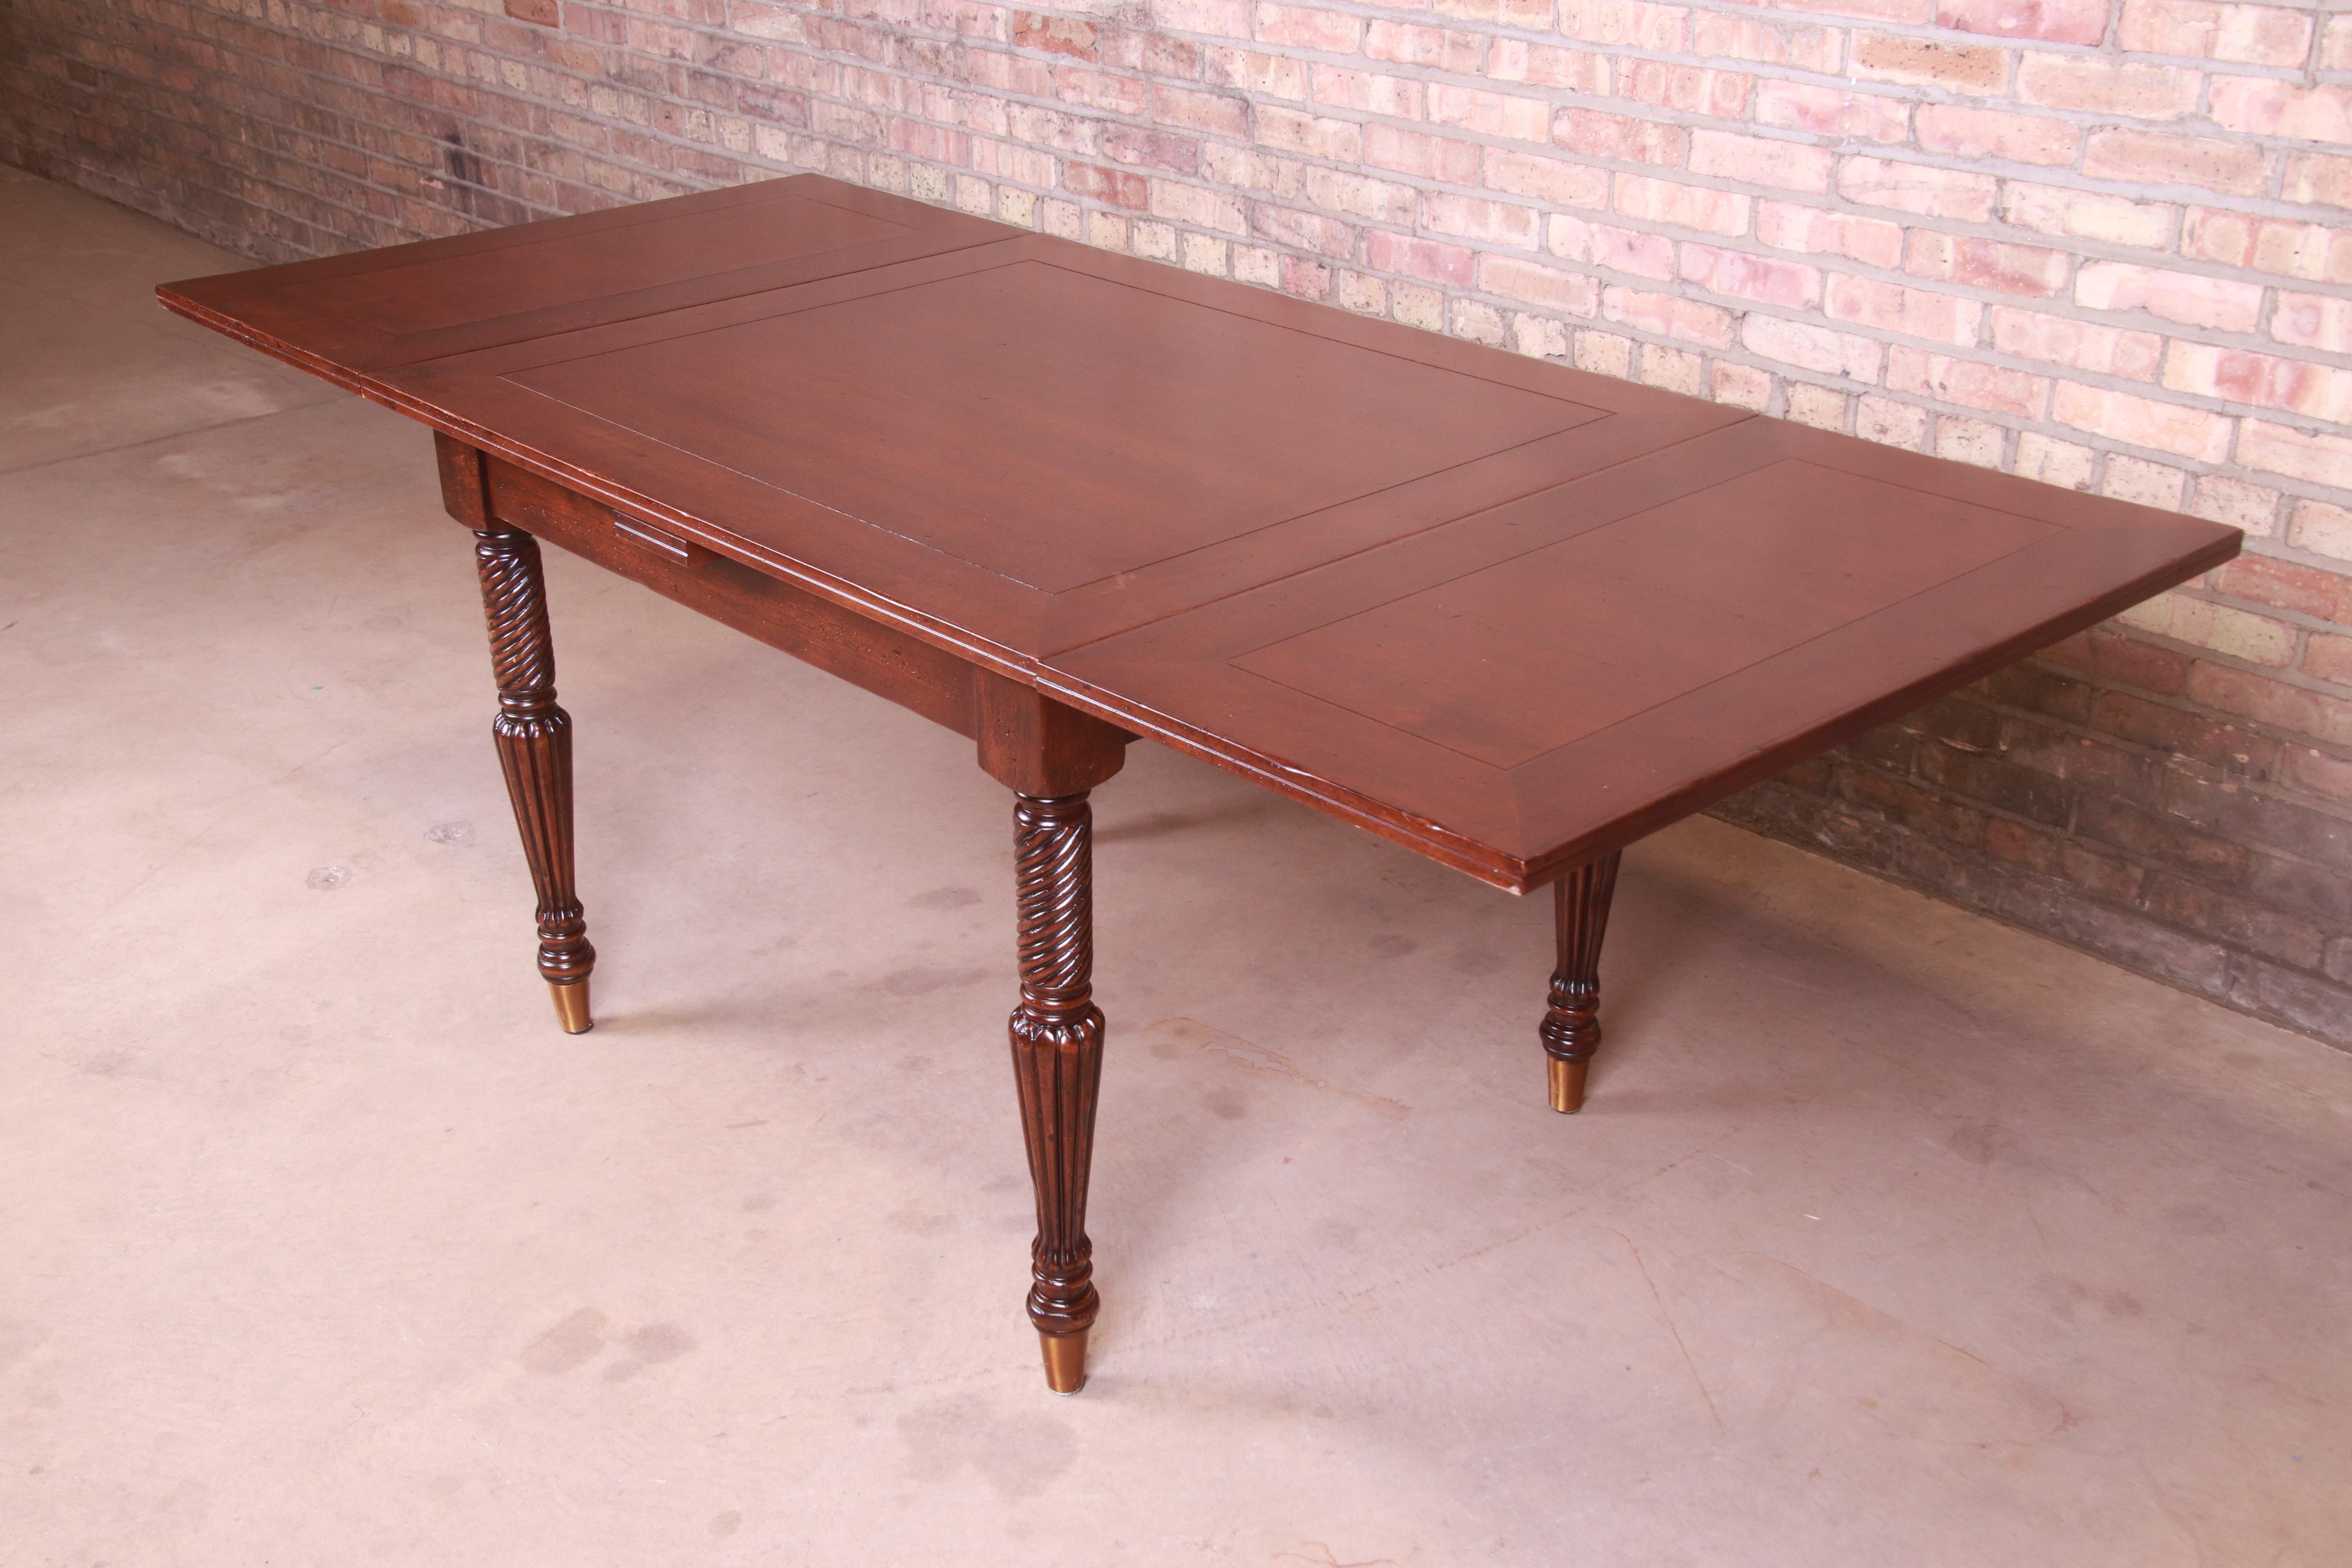 Italian Provincial Walnut Extension Dining Table by Guido Zichele, Refinished 3